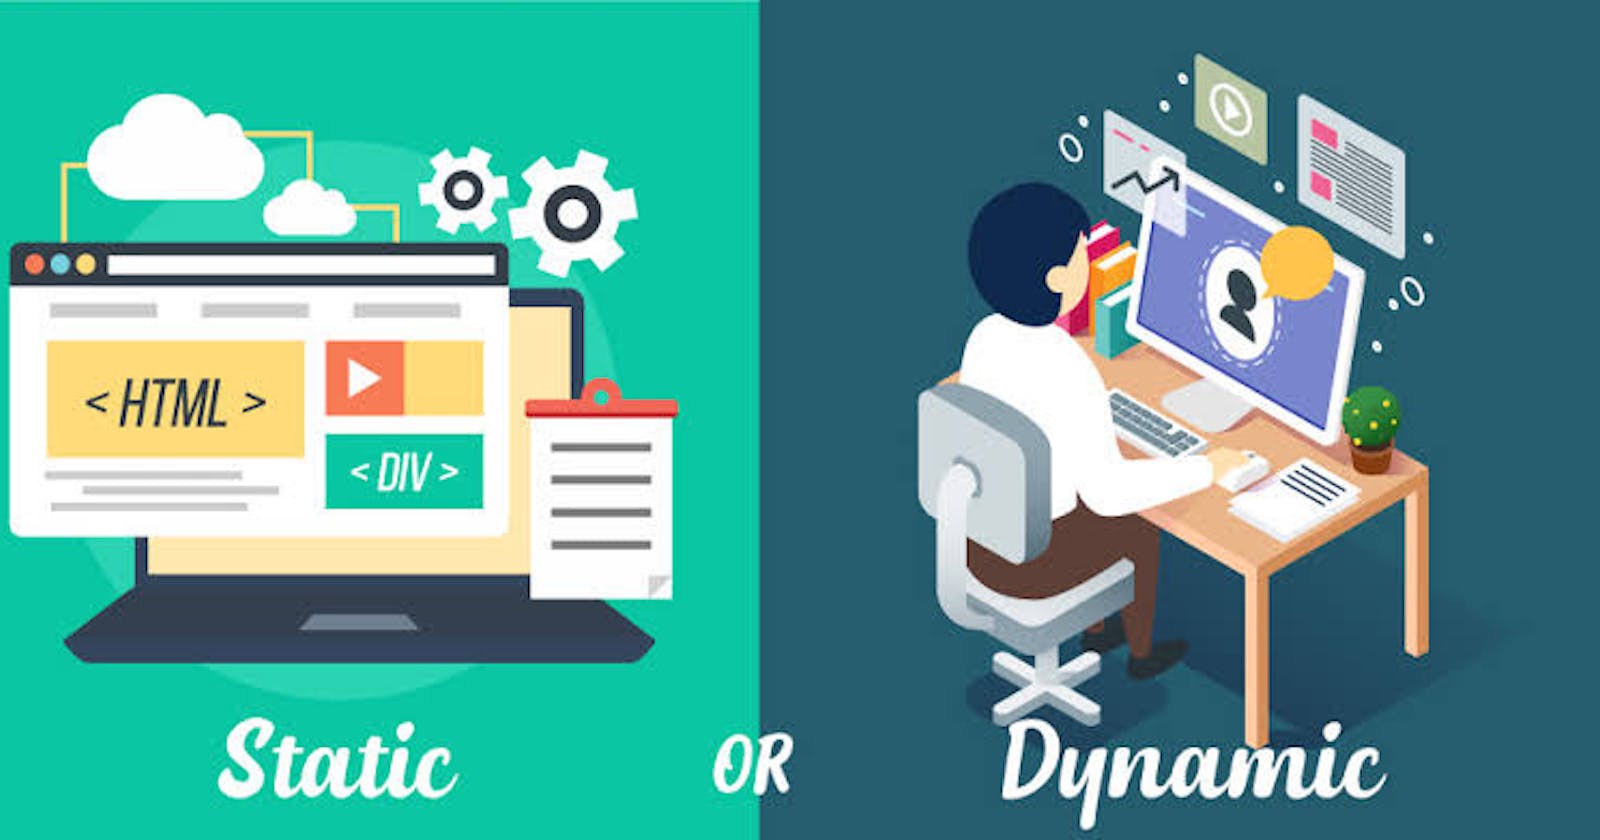 Static and Dynamic websites